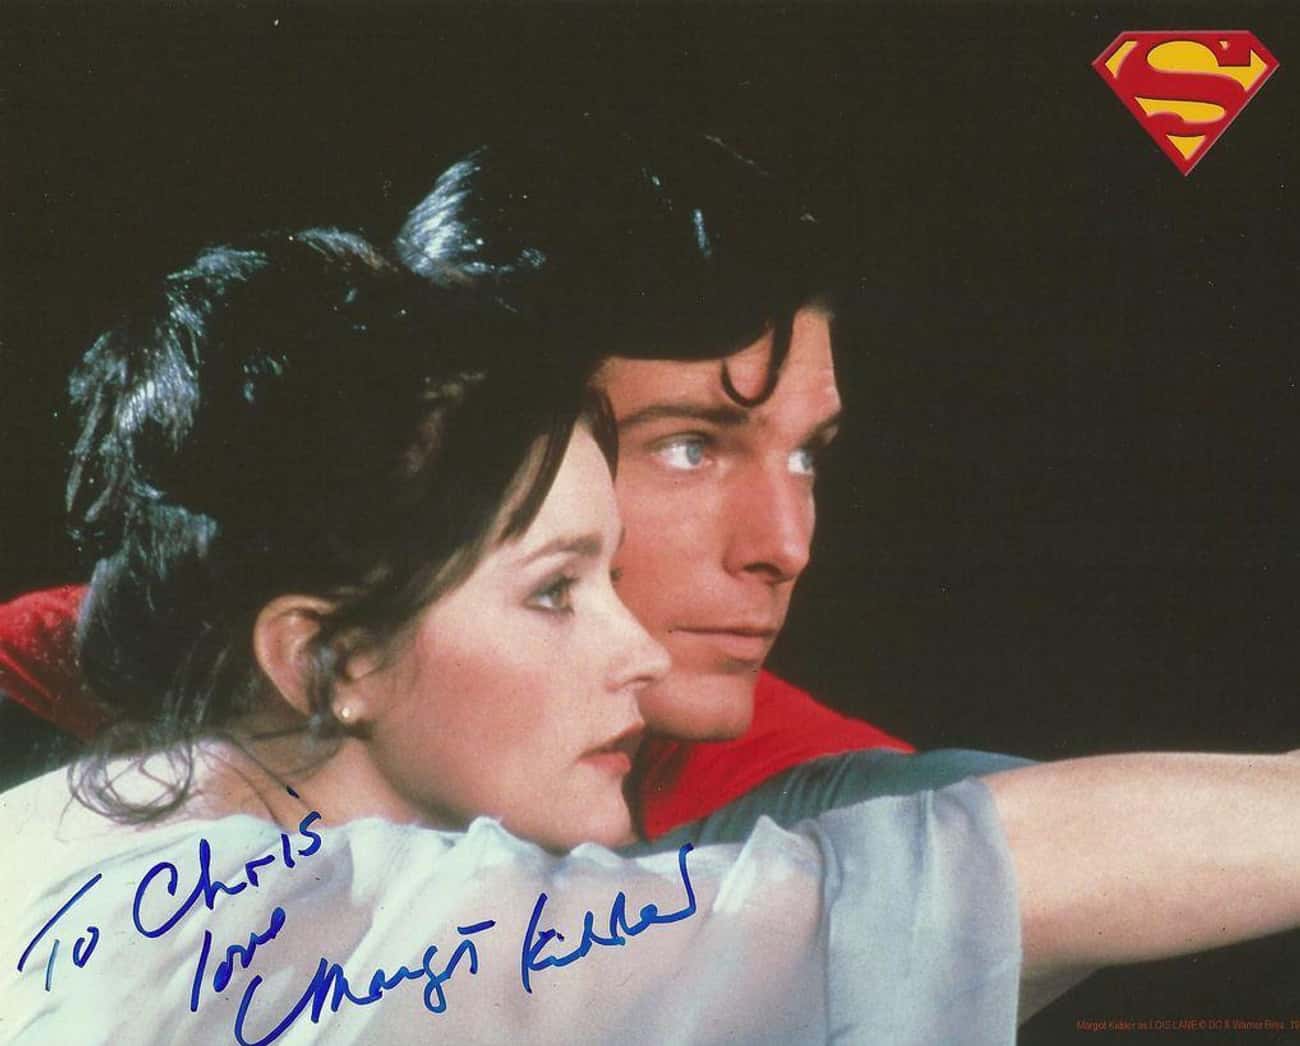 The Life Of Margot Kidder, Who Once Played Lois Lane, Became A Nightmare